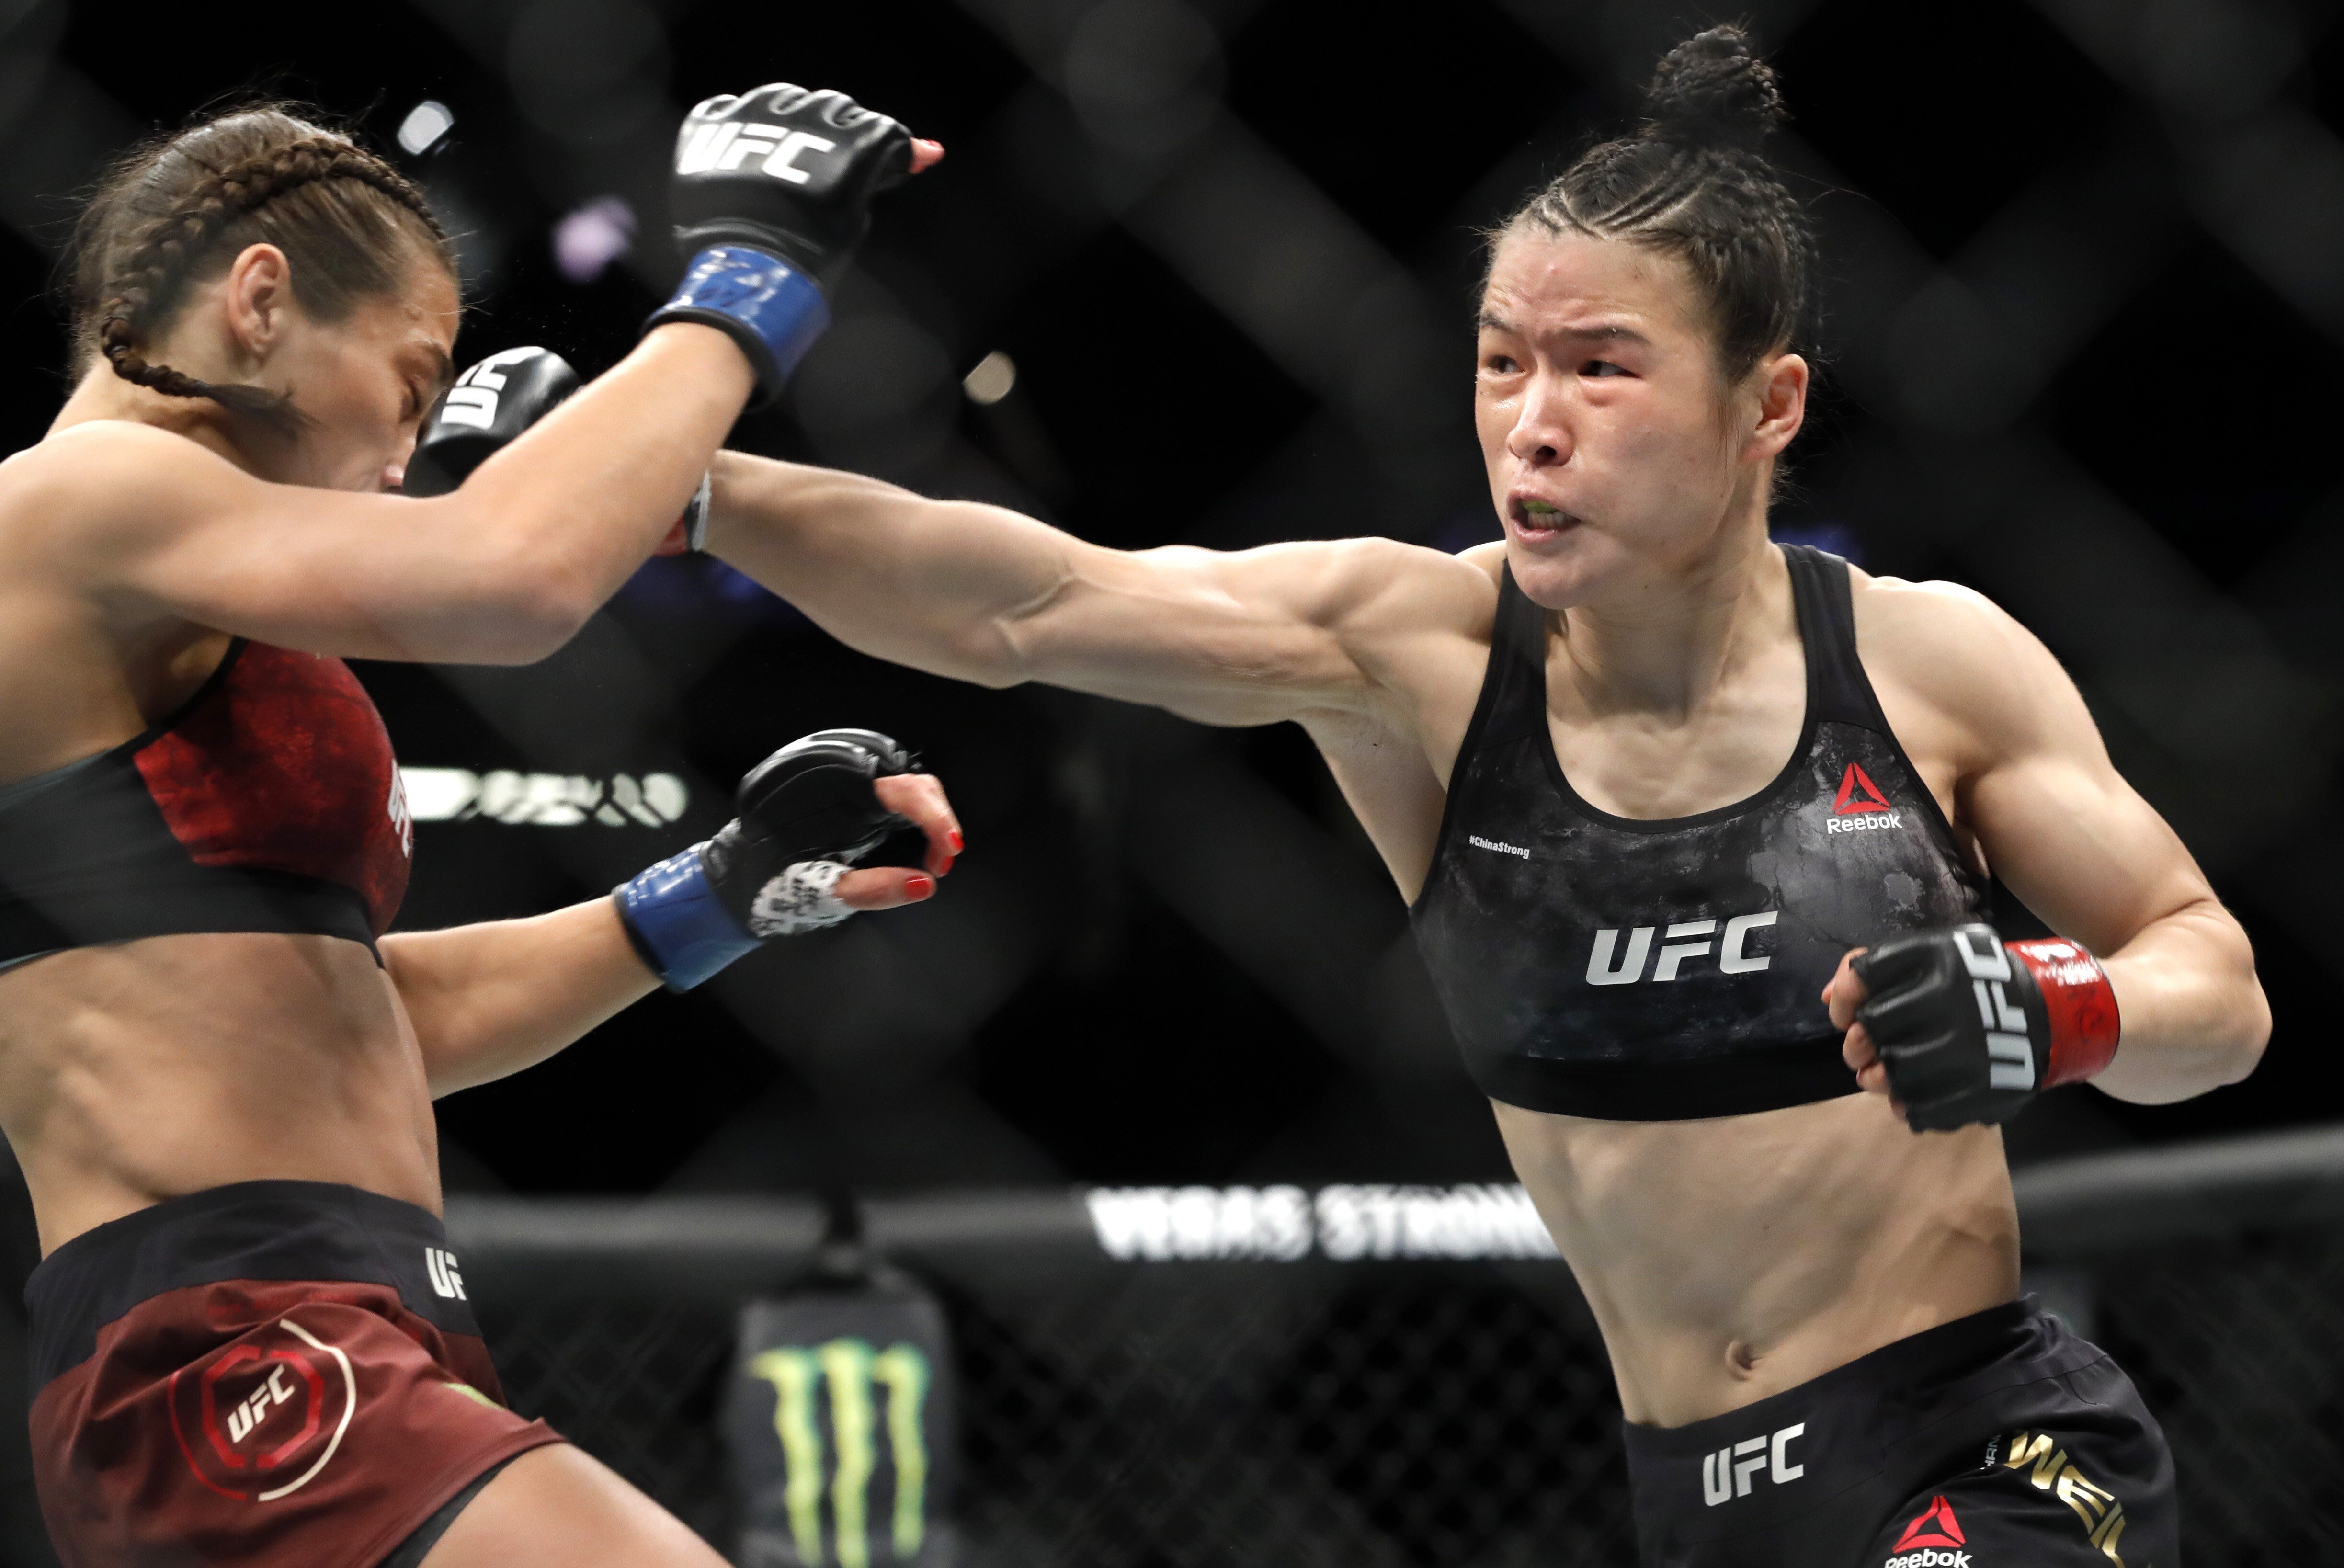 UFC women's strawweight champion Zhang Weili of China punches former champion Joanna Jedrzejczyk of Poland at UFC 248 in March, 2020. Photo: AP